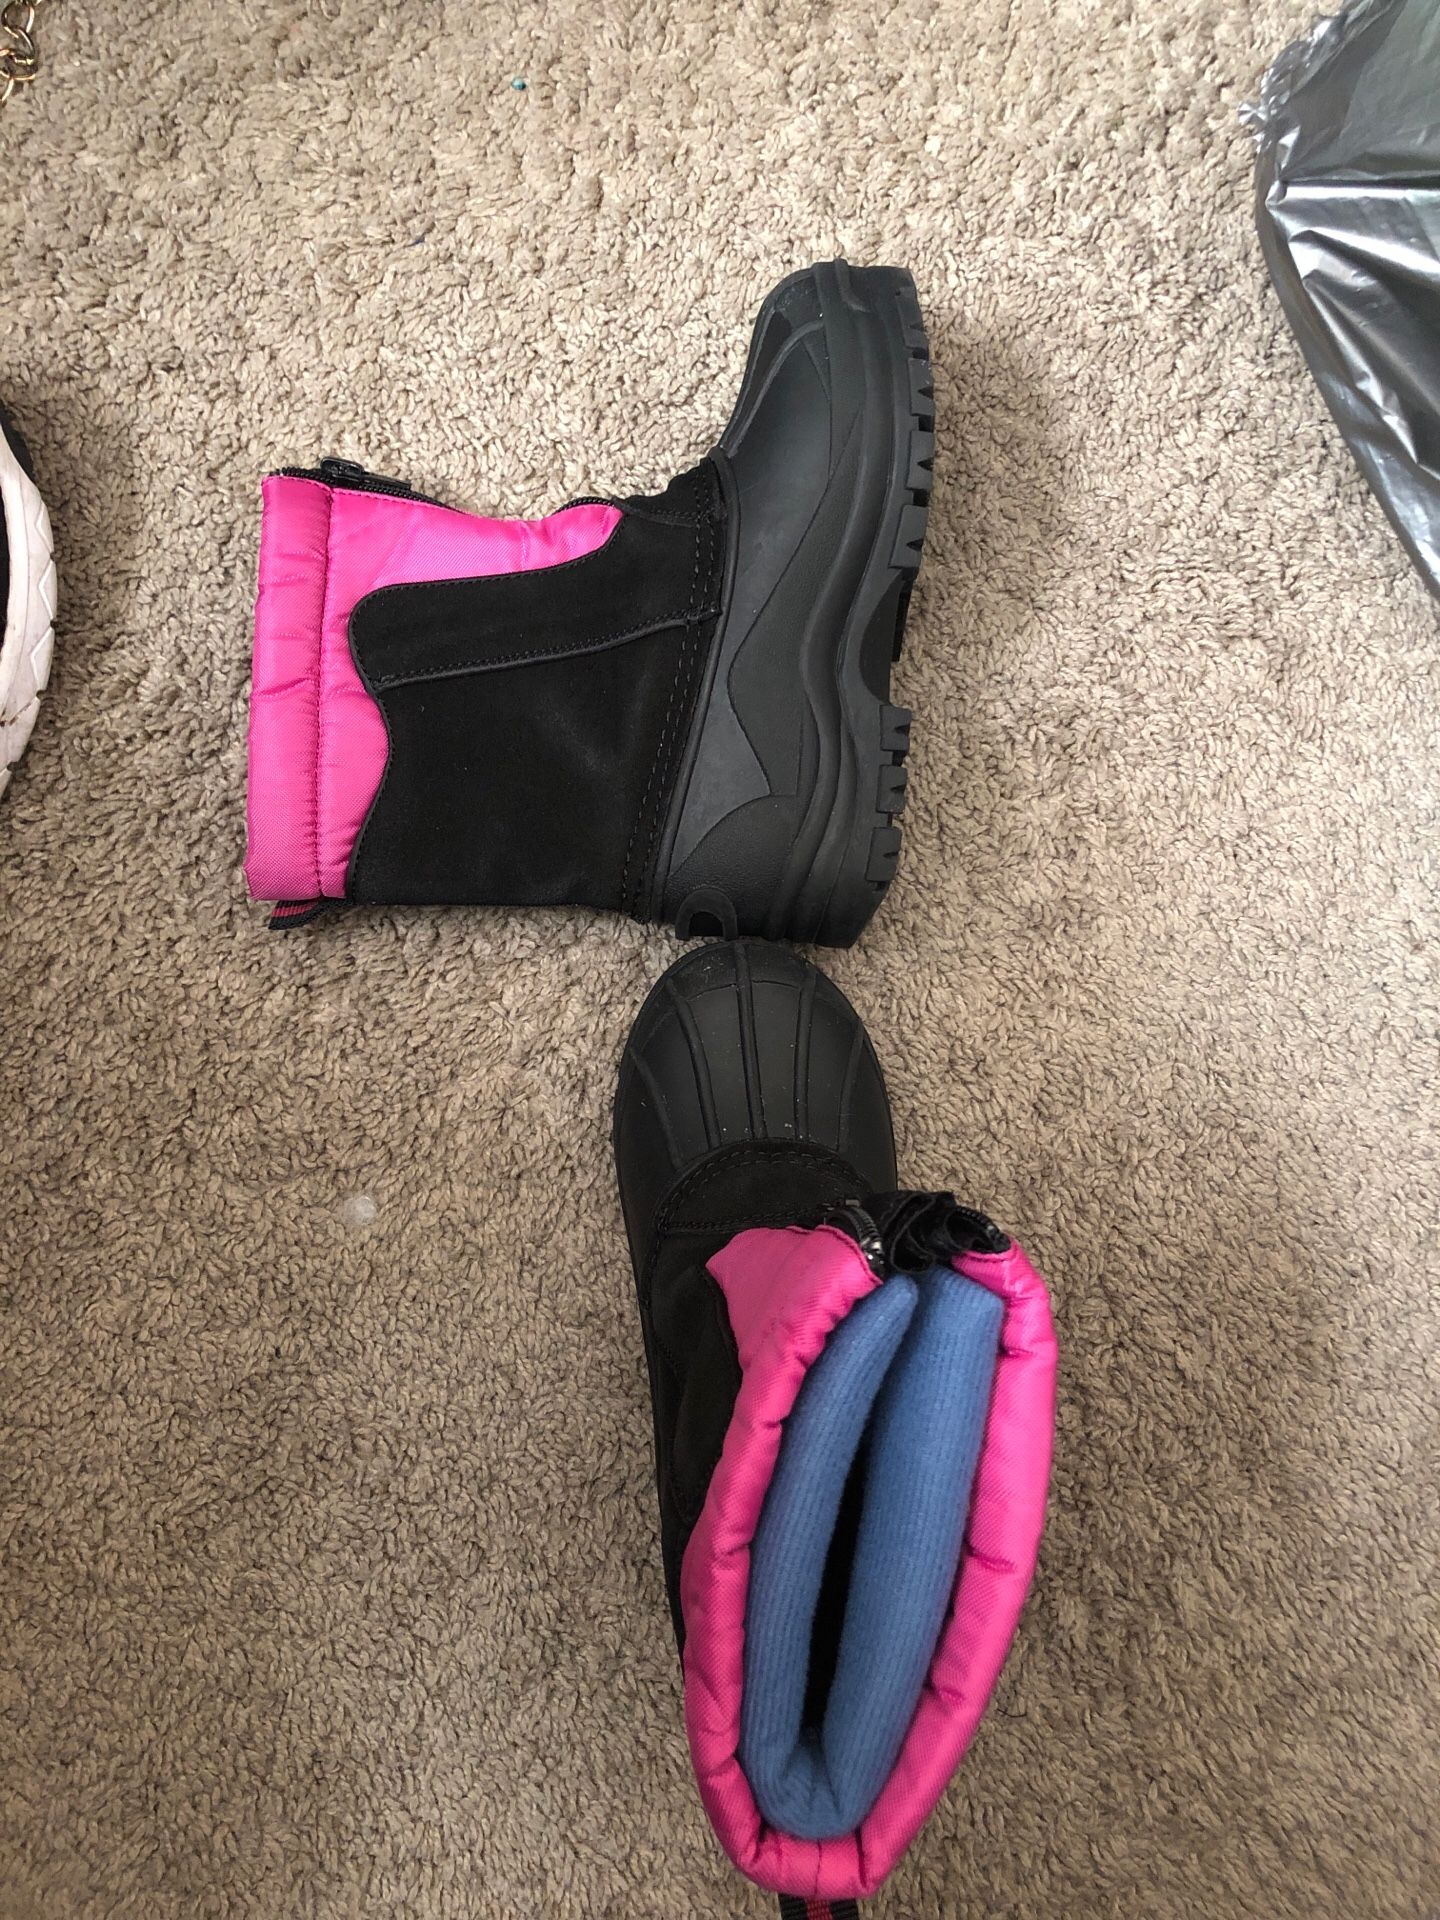 Girls size 11 snow boots